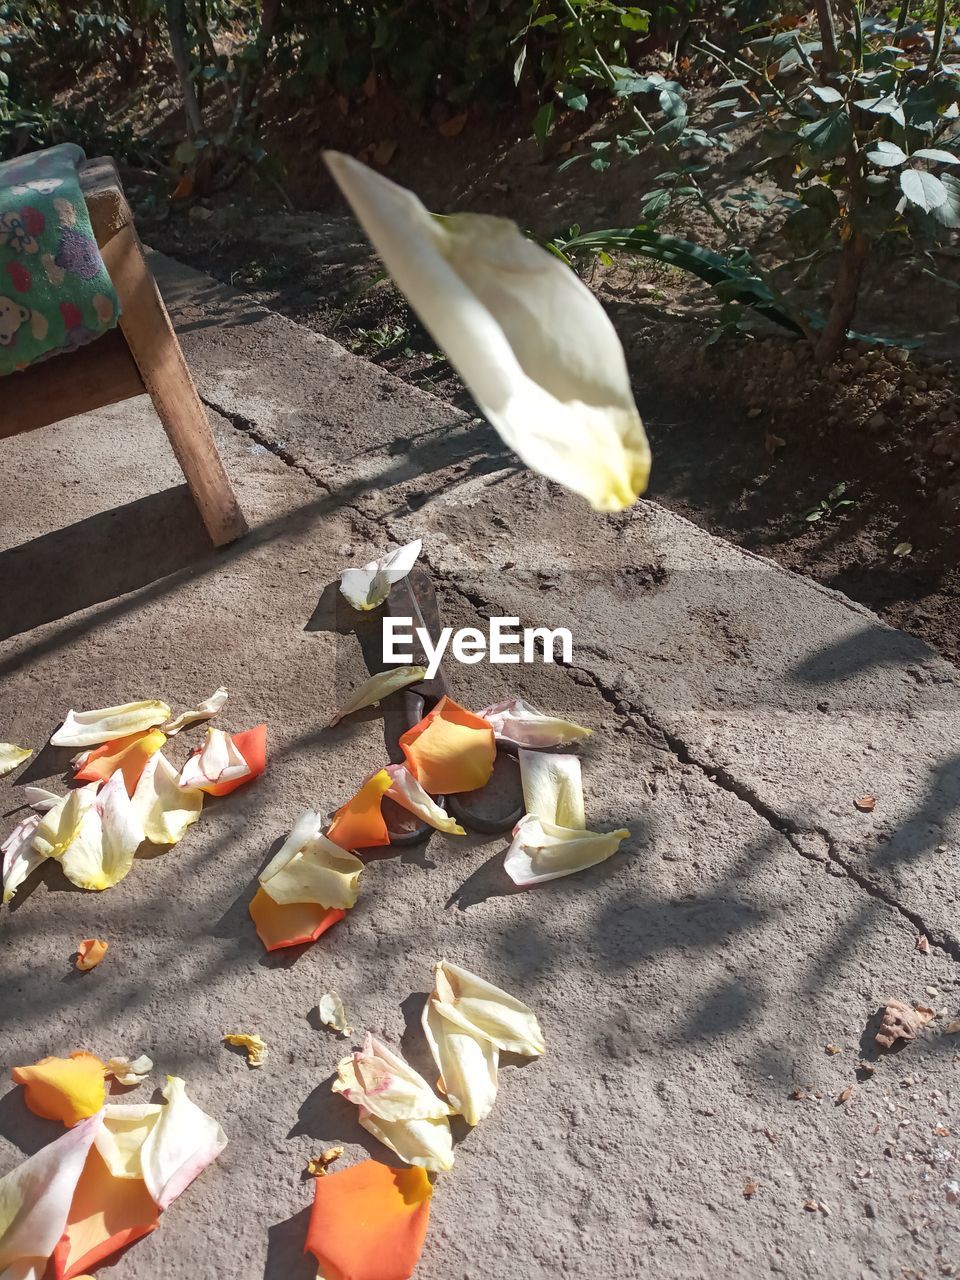 HIGH ANGLE VIEW OF BIRD ON FALLEN LEAVES ON WOOD